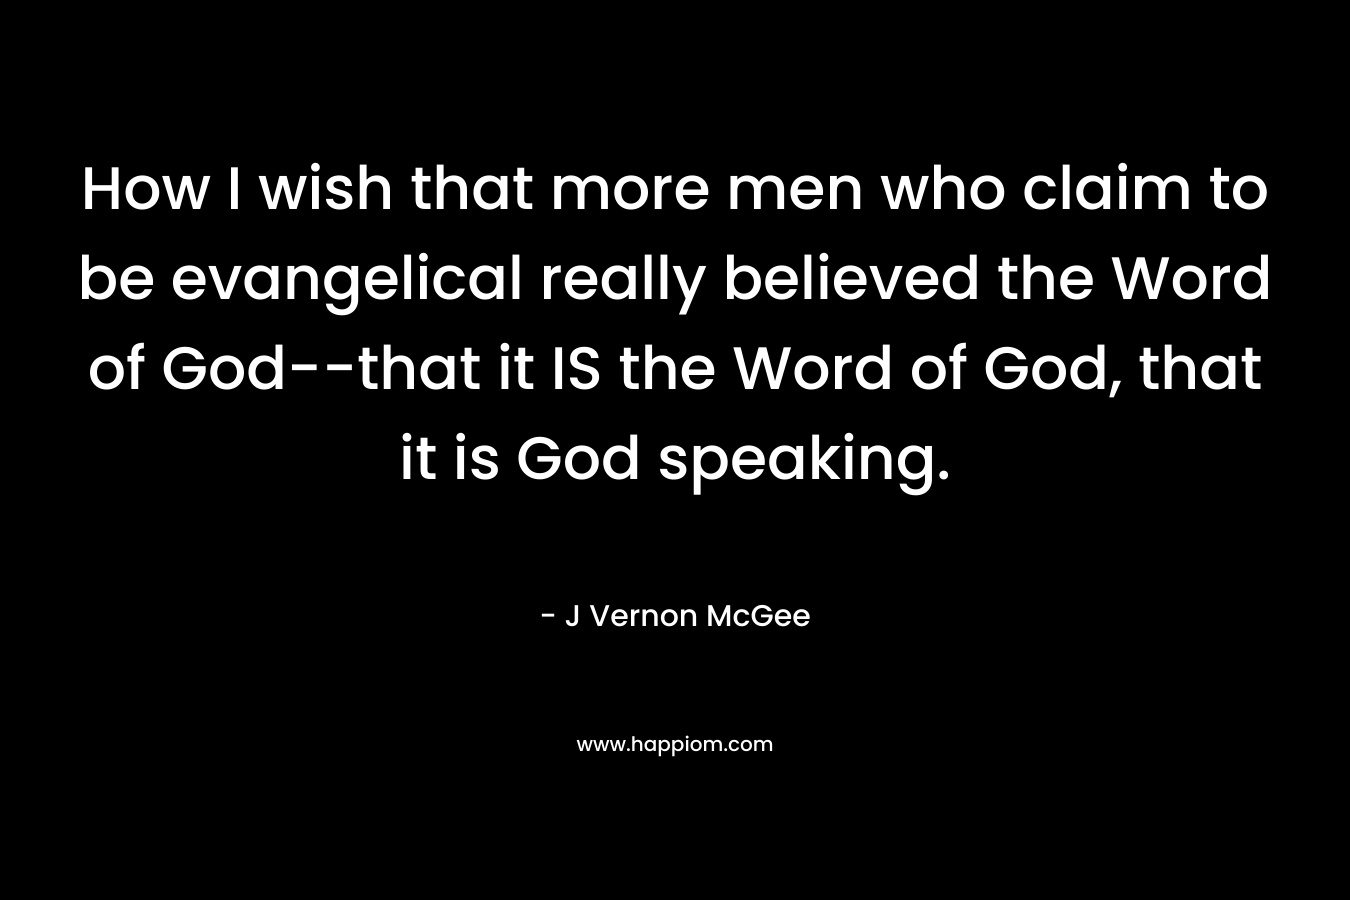 How I wish that more men who claim to be evangelical really believed the Word of God--that it IS the Word of God, that it is God speaking.